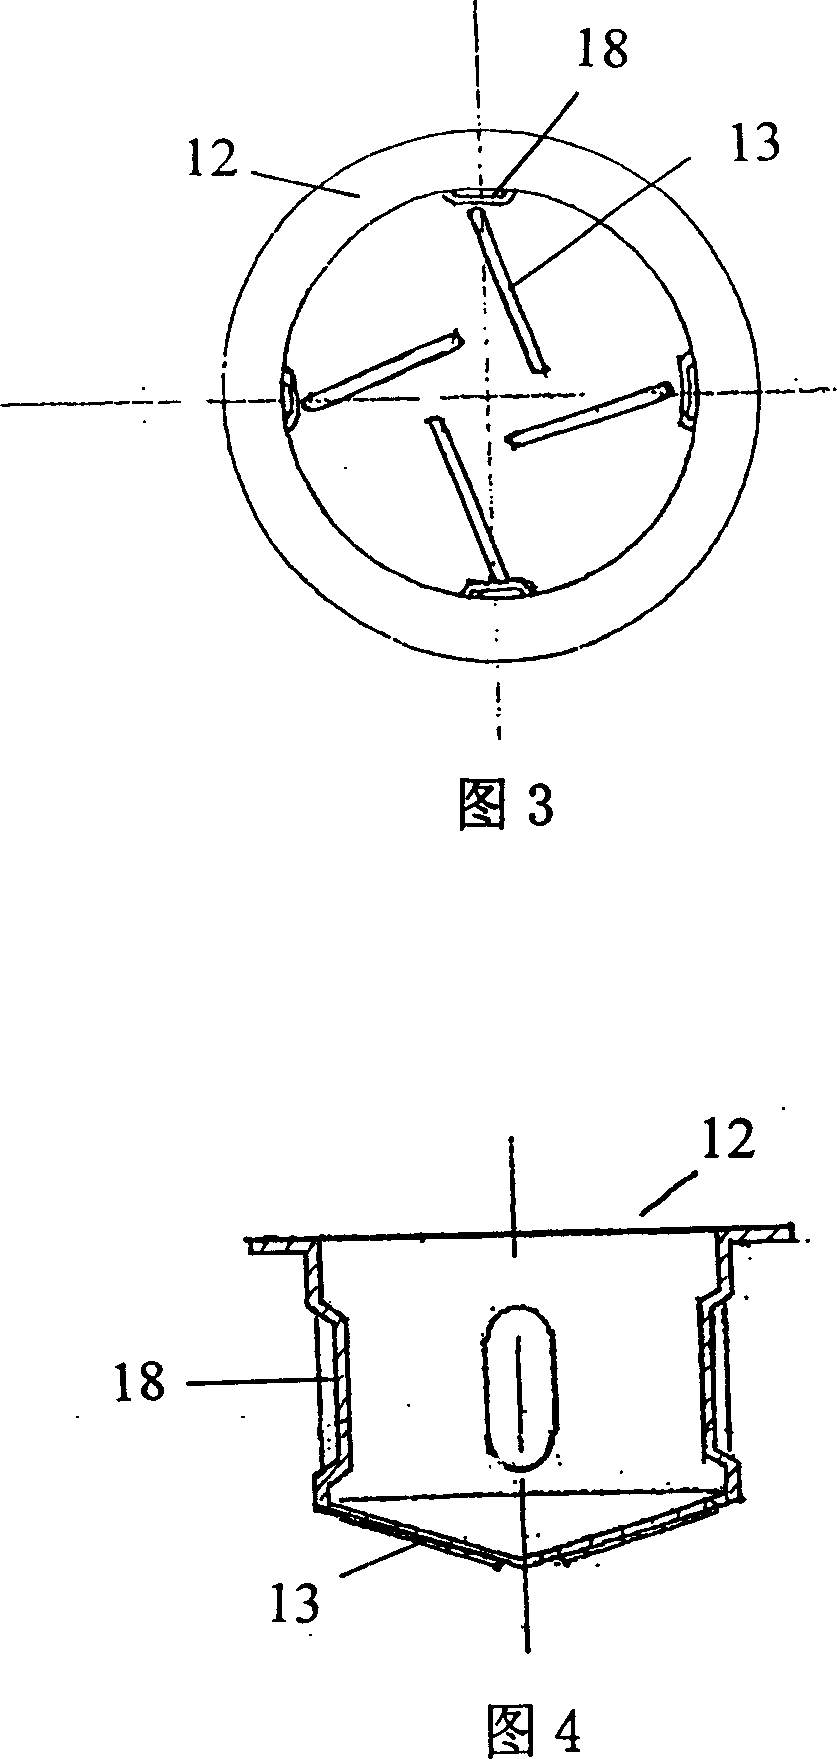 Device for grinding medical tablets